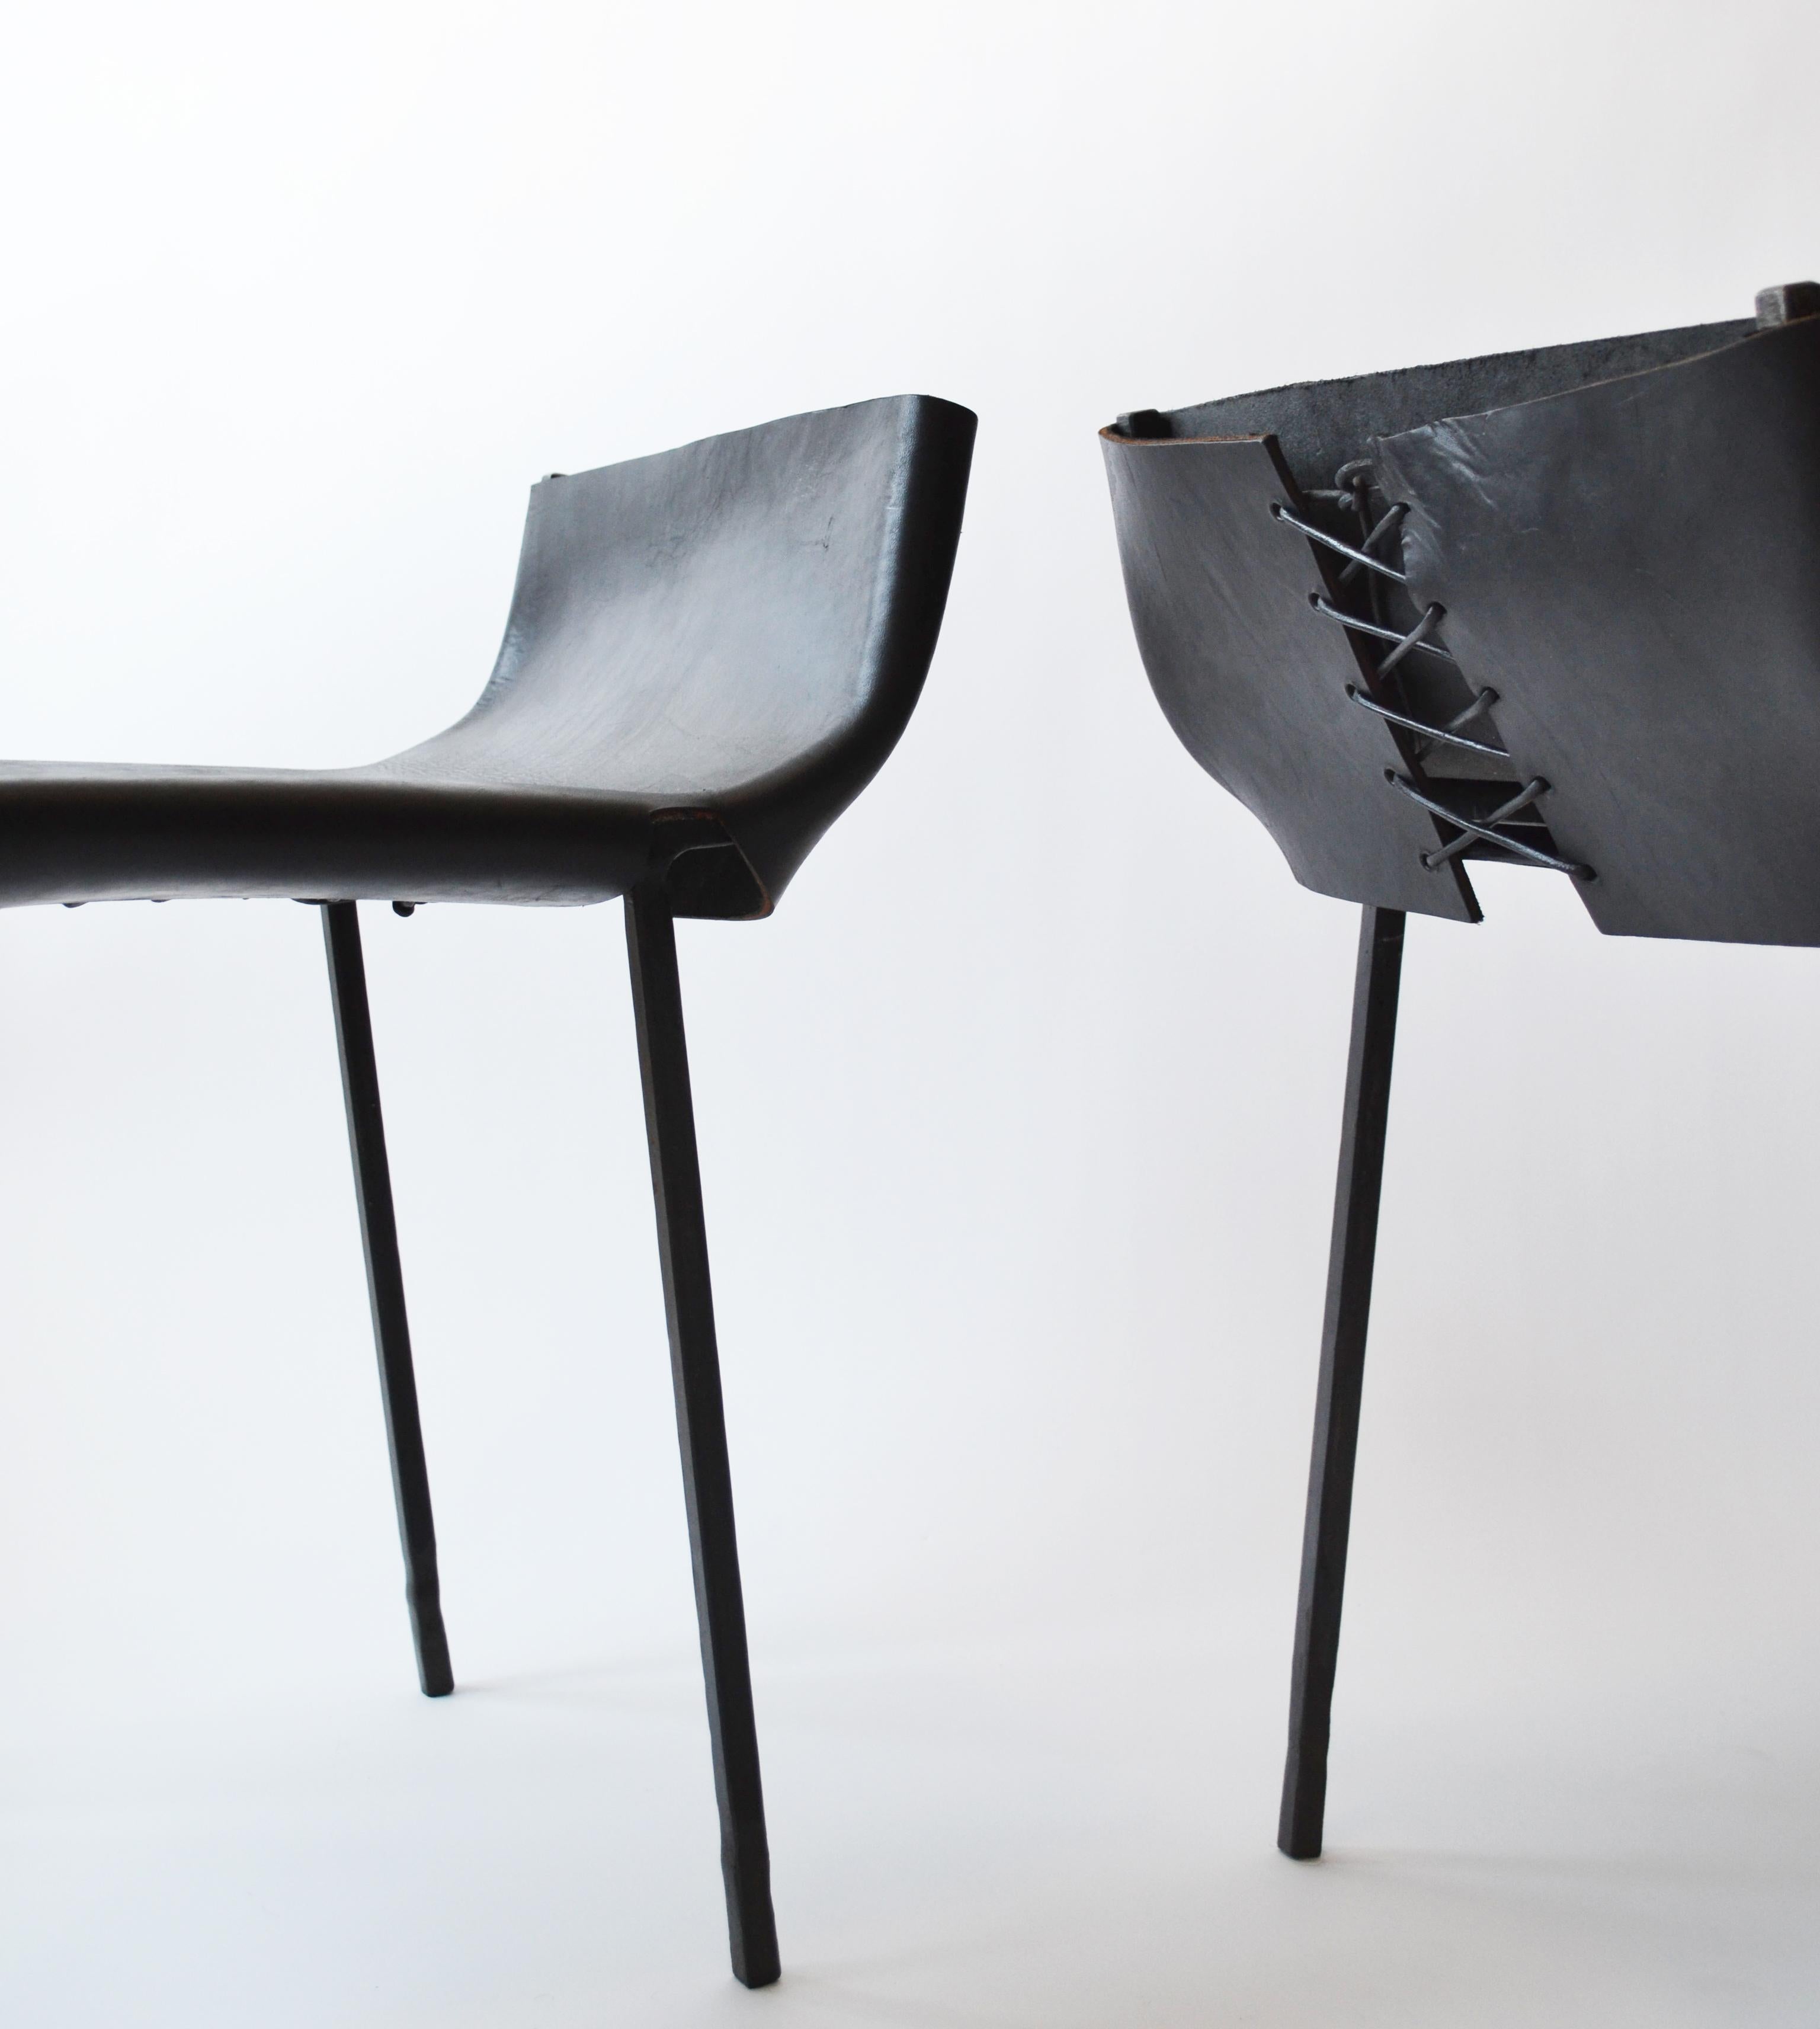 CHAIR NO. 1 
J.M. Szymanski
d. 2018

Inspired by a Spanish toreador, this sleek combination of blackened steel and thick bull leather. Can be modified to any seat height. 

Custom sizes available. Made in the Bronx, New York, USA.

Our products are